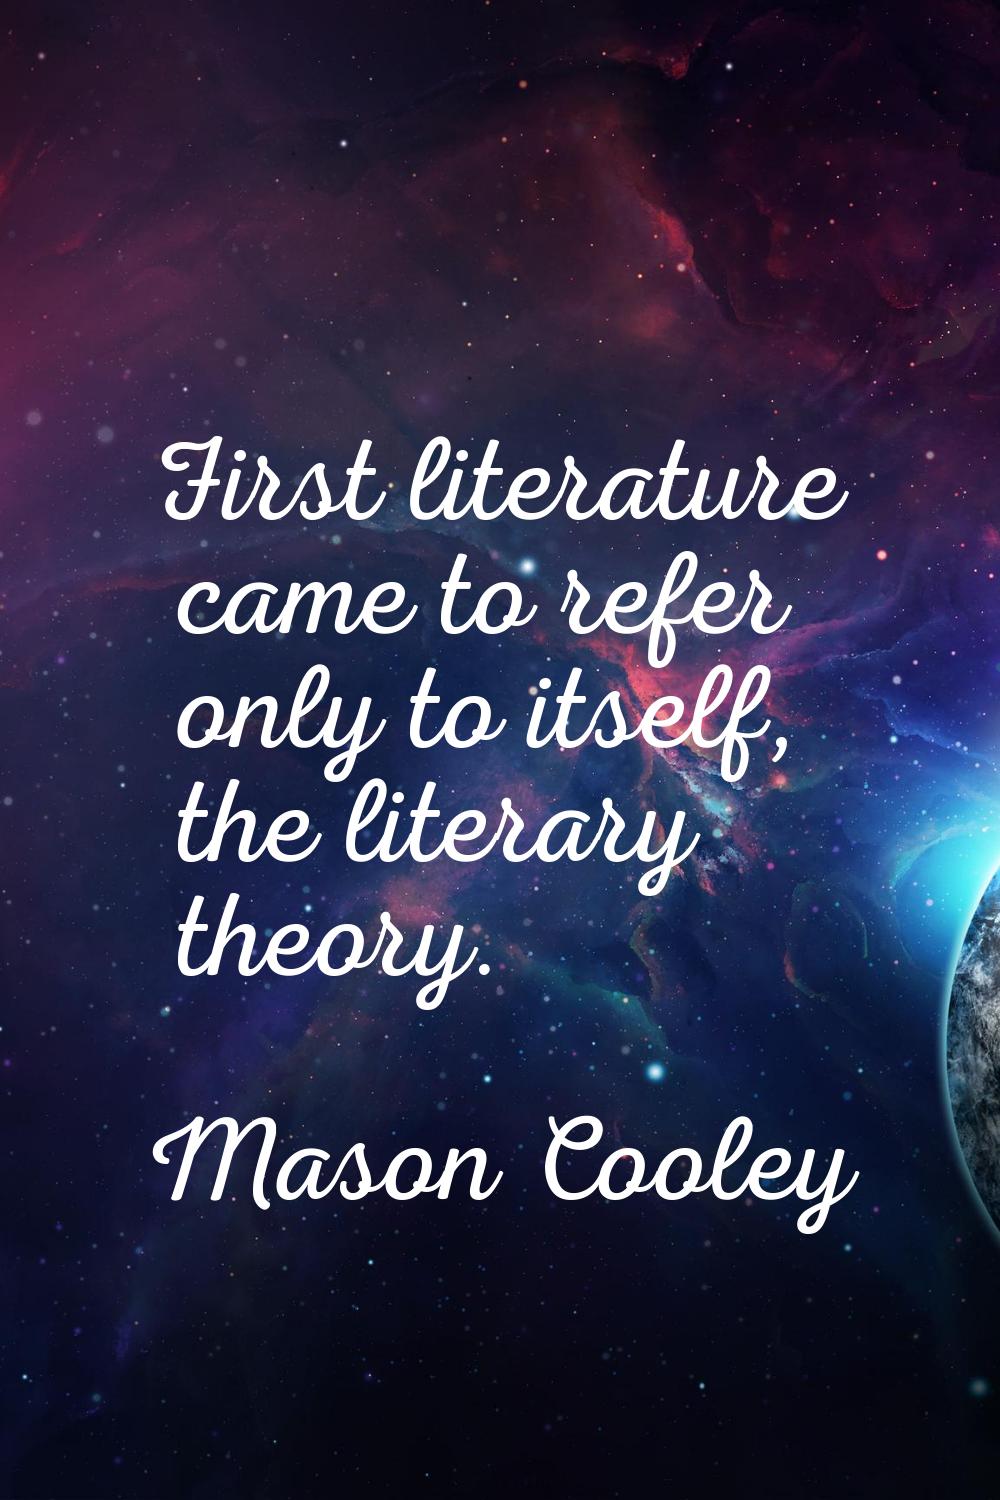 First literature came to refer only to itself, the literary theory.